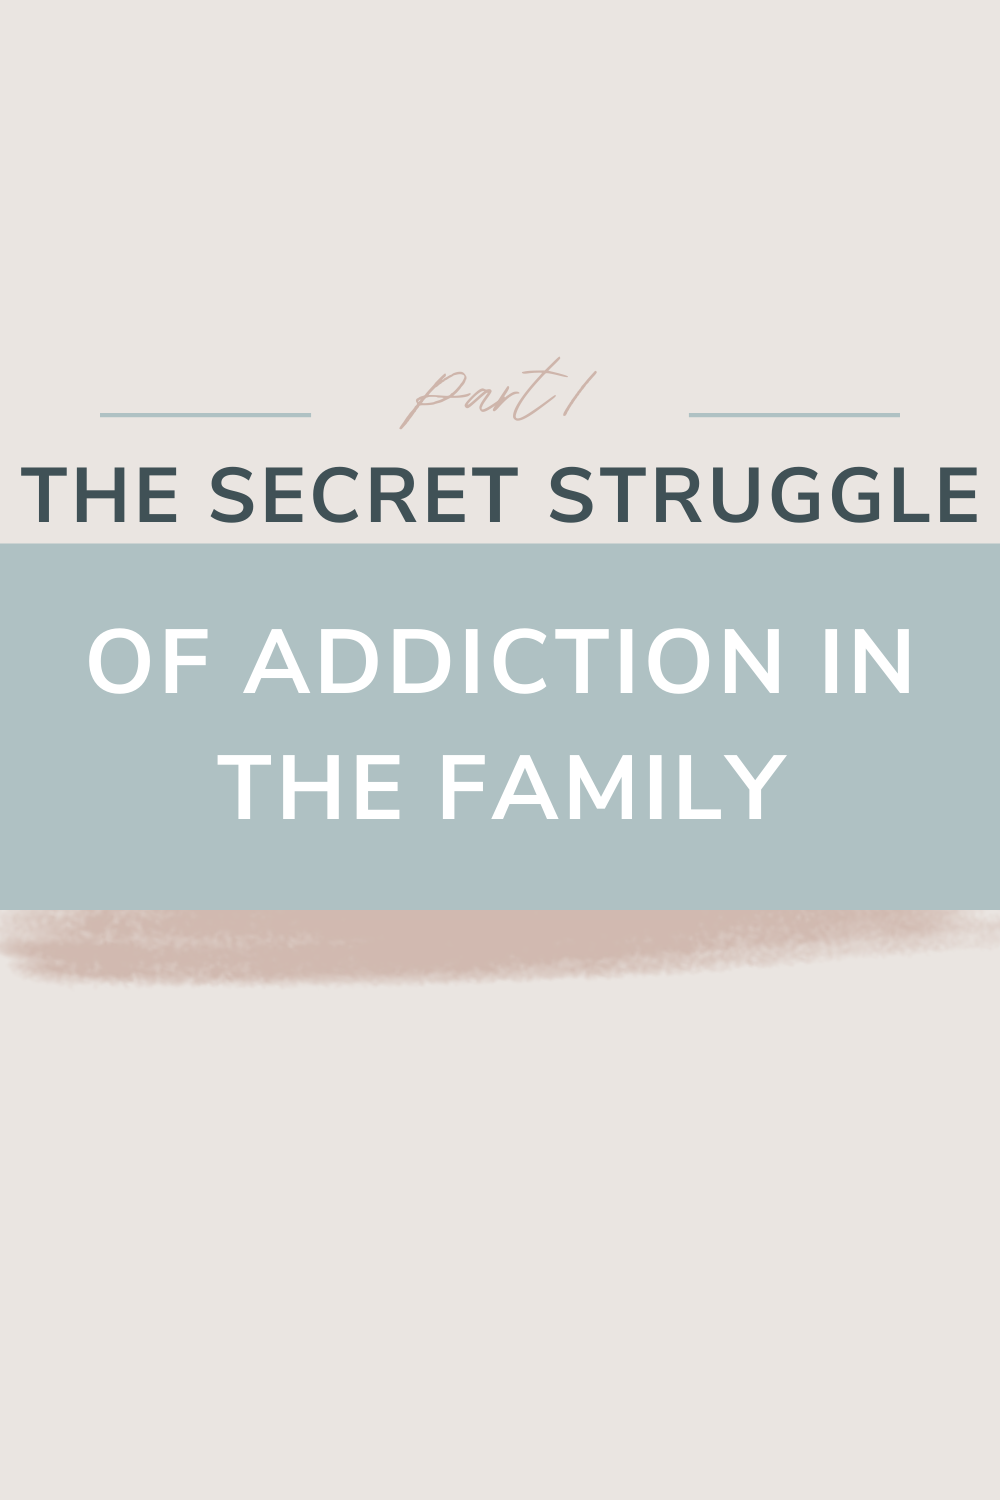 The Secret Struggle of Addiction in the Family | Have you watched someone struggle with drug or alcohol abuse? Have you experienced their lies, manipulations, or loss of self? Addiction can wreak havoc on family systems and we often think "I'm not the one who needs help." What if you are? This blog touches on the importance of treatment in all levels of the family. Read on...